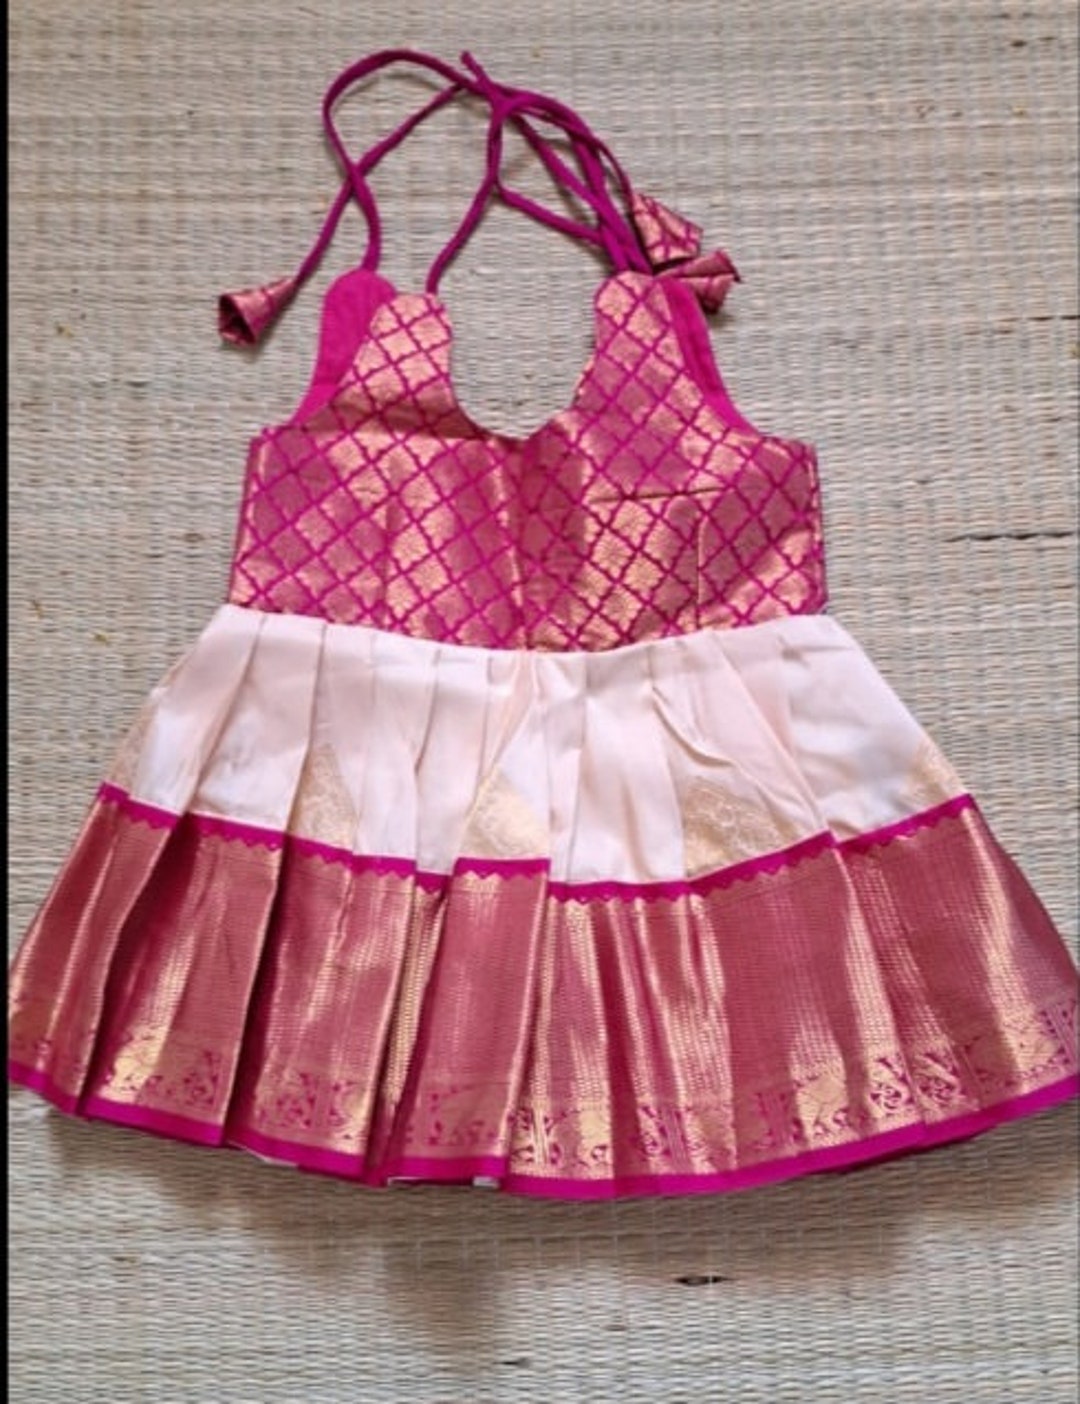 Buy Kids Frocks online at Best Prices in India | Free Delivery